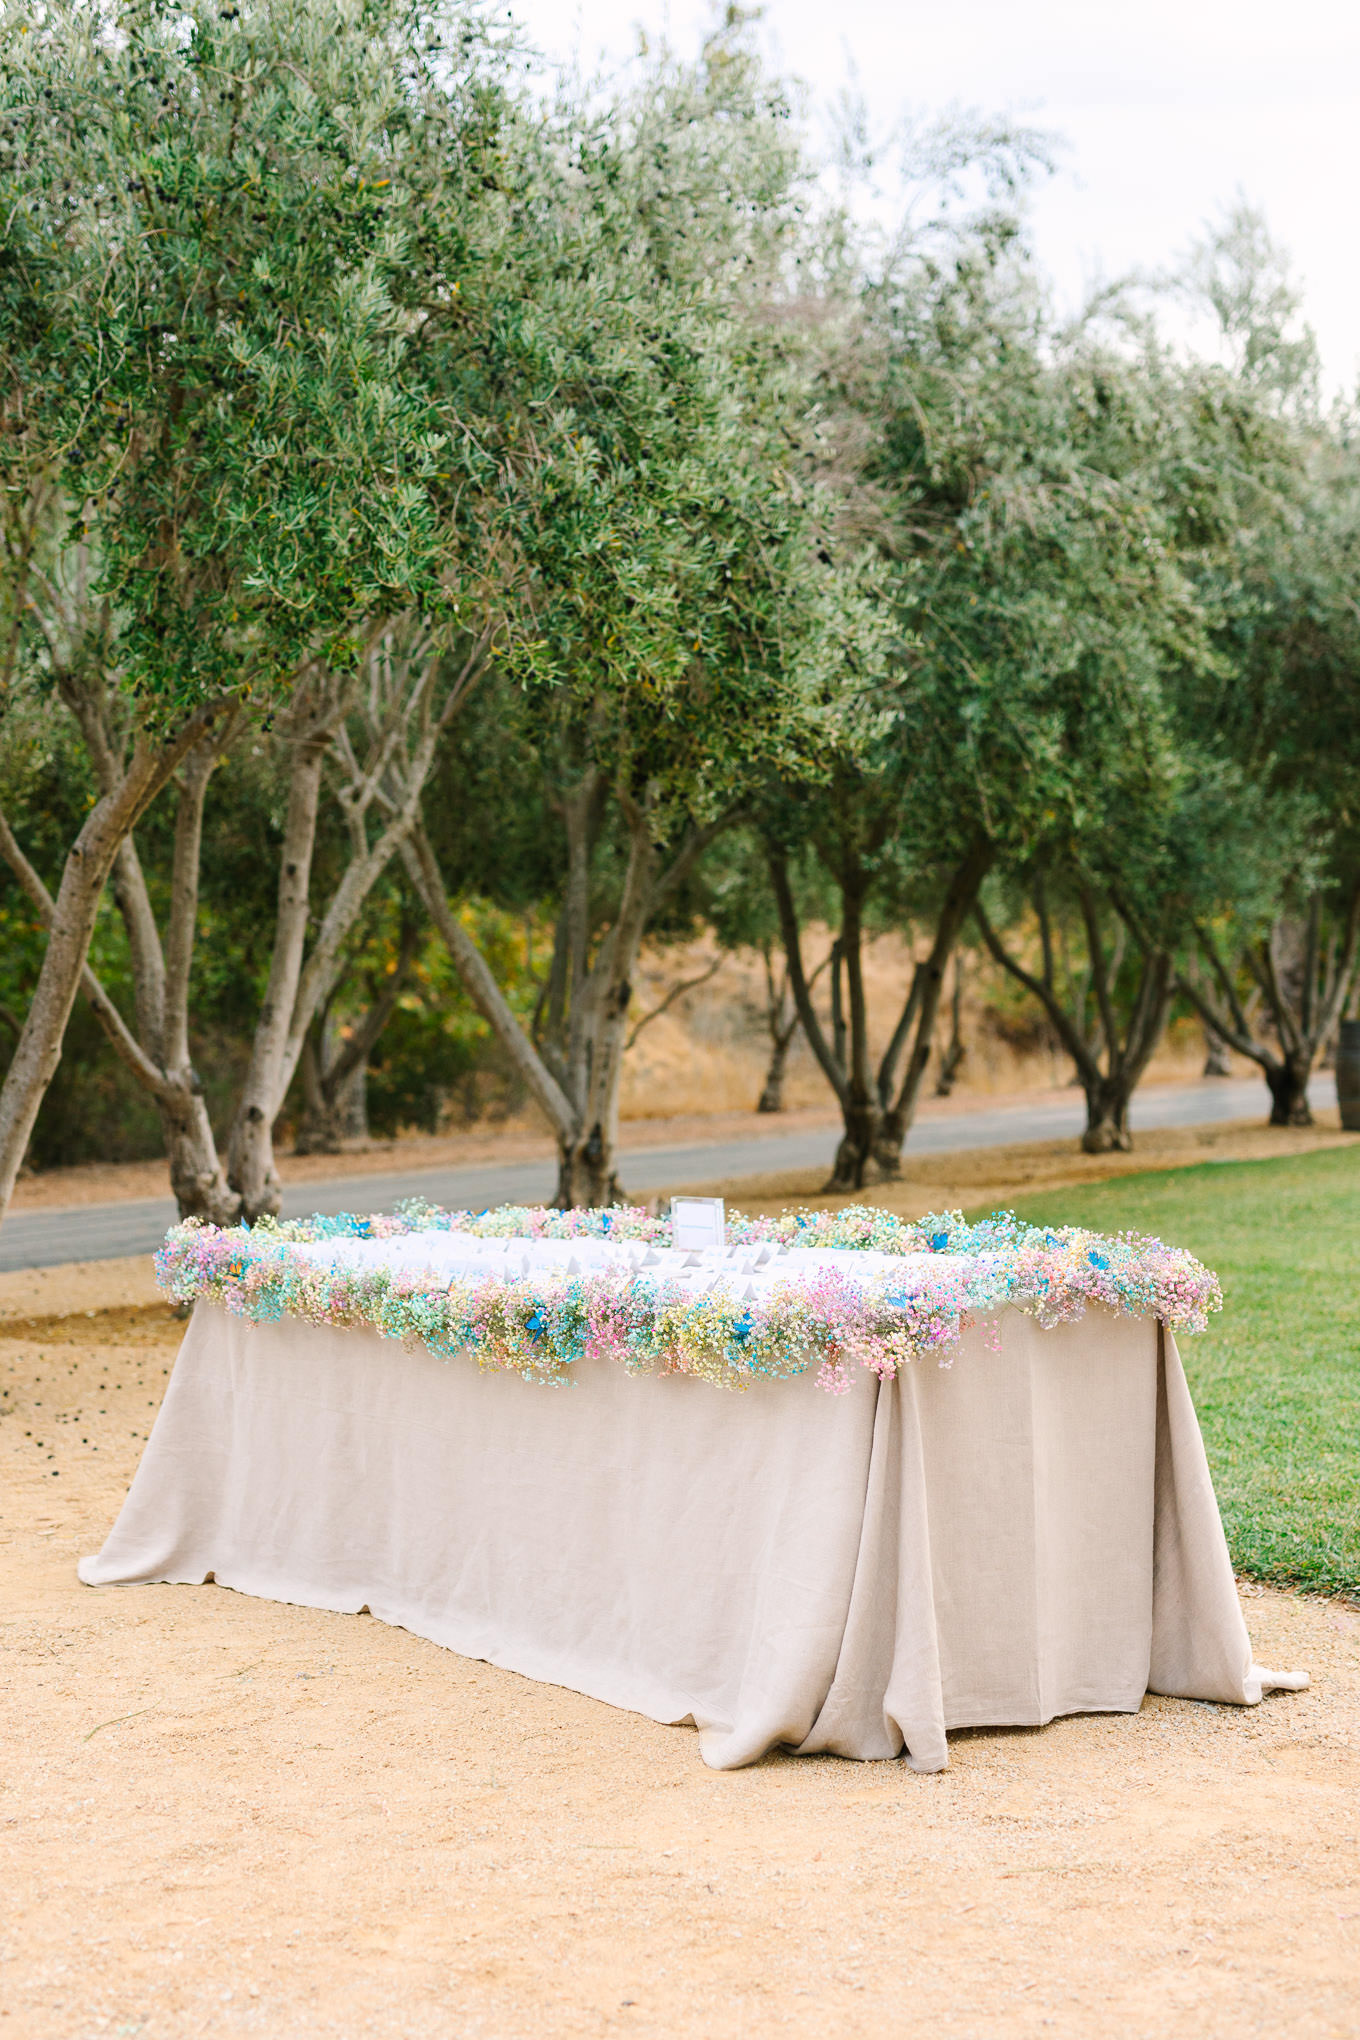 Guest name cards | Colorful and quirky wedding at Higuera Ranch in San Luis Obispo | #sanluisobispowedding #californiawedding #higueraranch #madonnainn   Source: Mary Costa Photography | Los Angeles